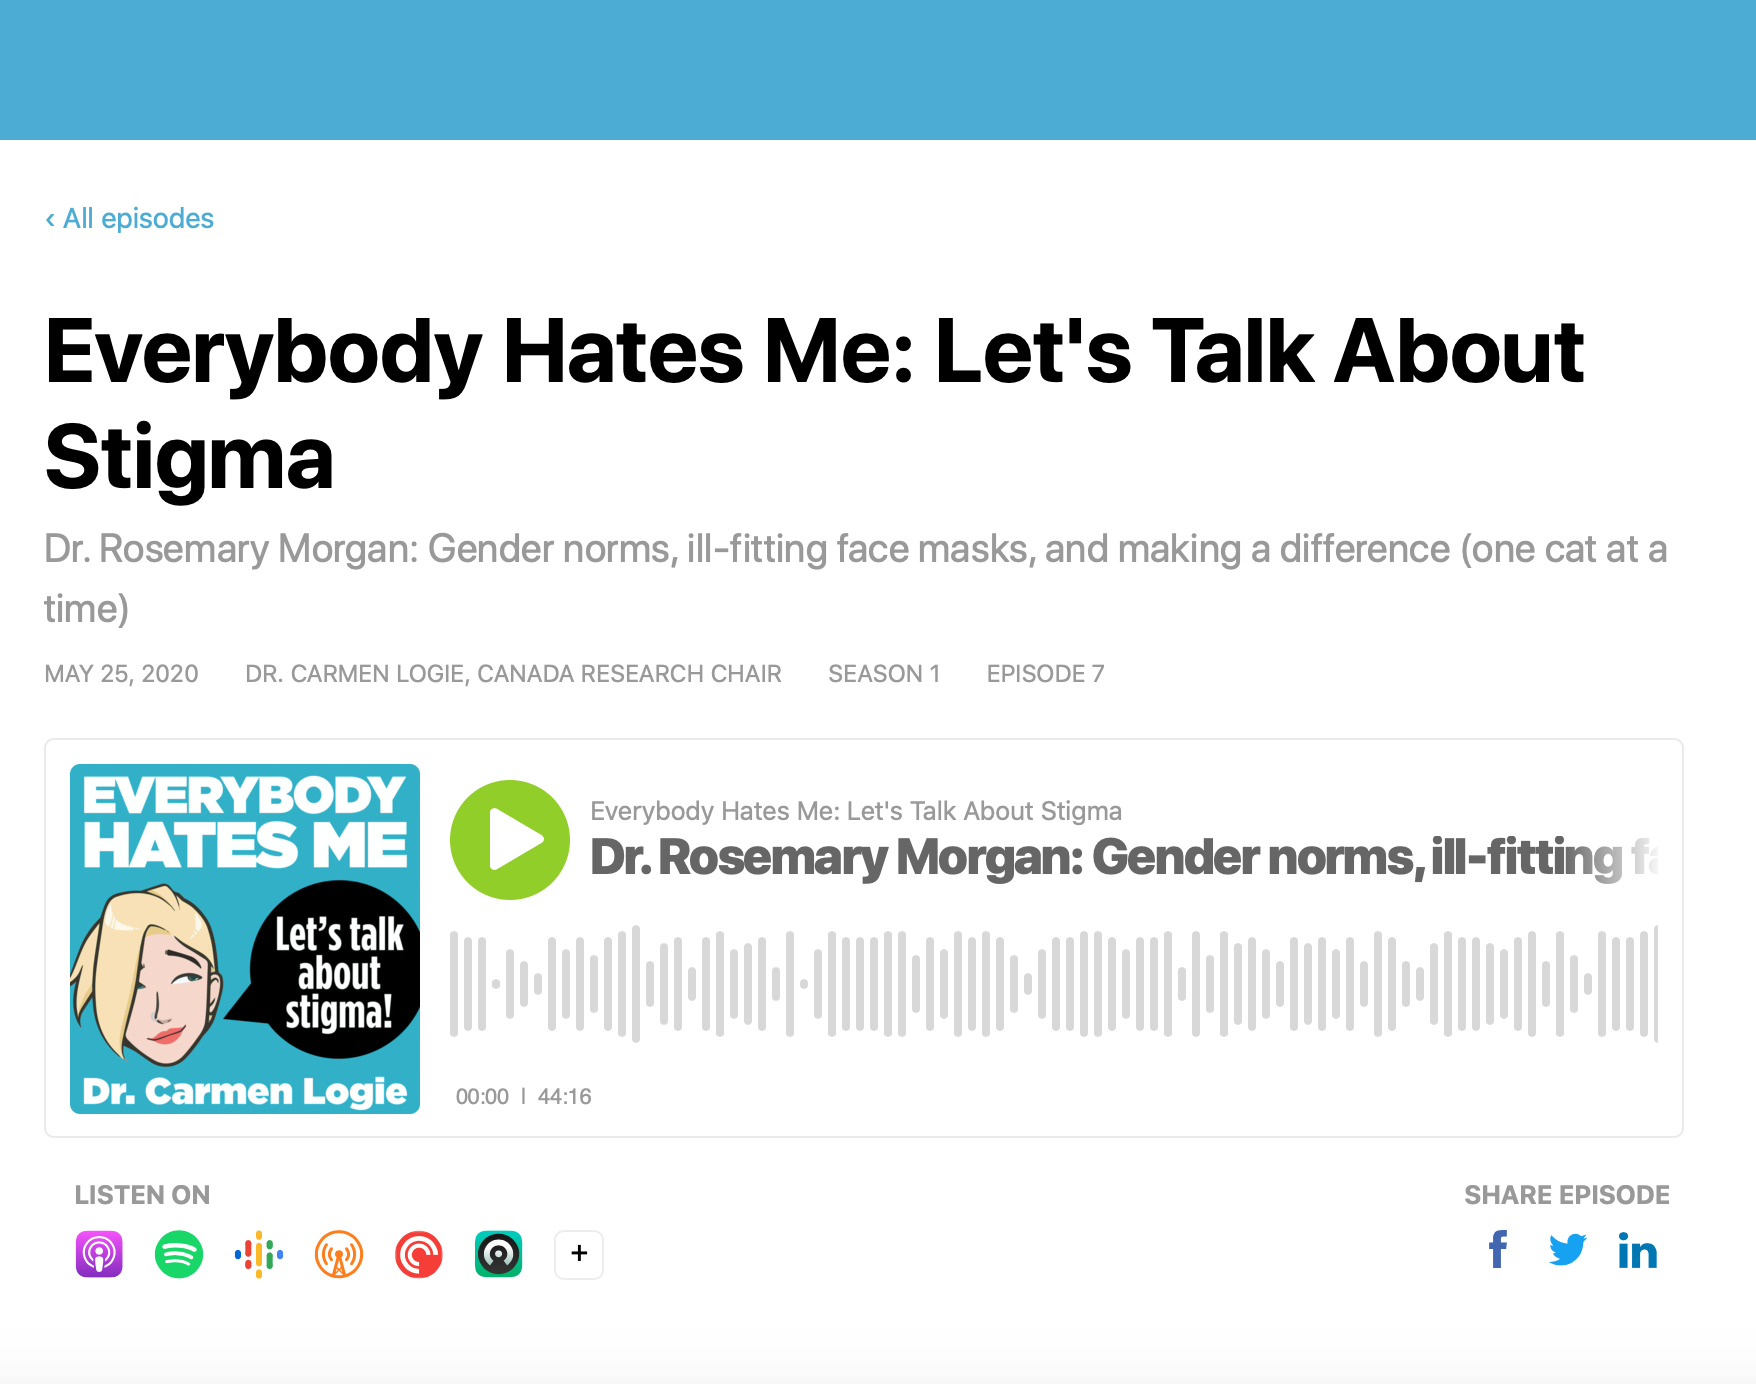 Everybody hates me: let’s talk about stigma – Dr. Rosemary Morgan: gender norms, ill-fitting face masks, and making a difference (one cat at a time)